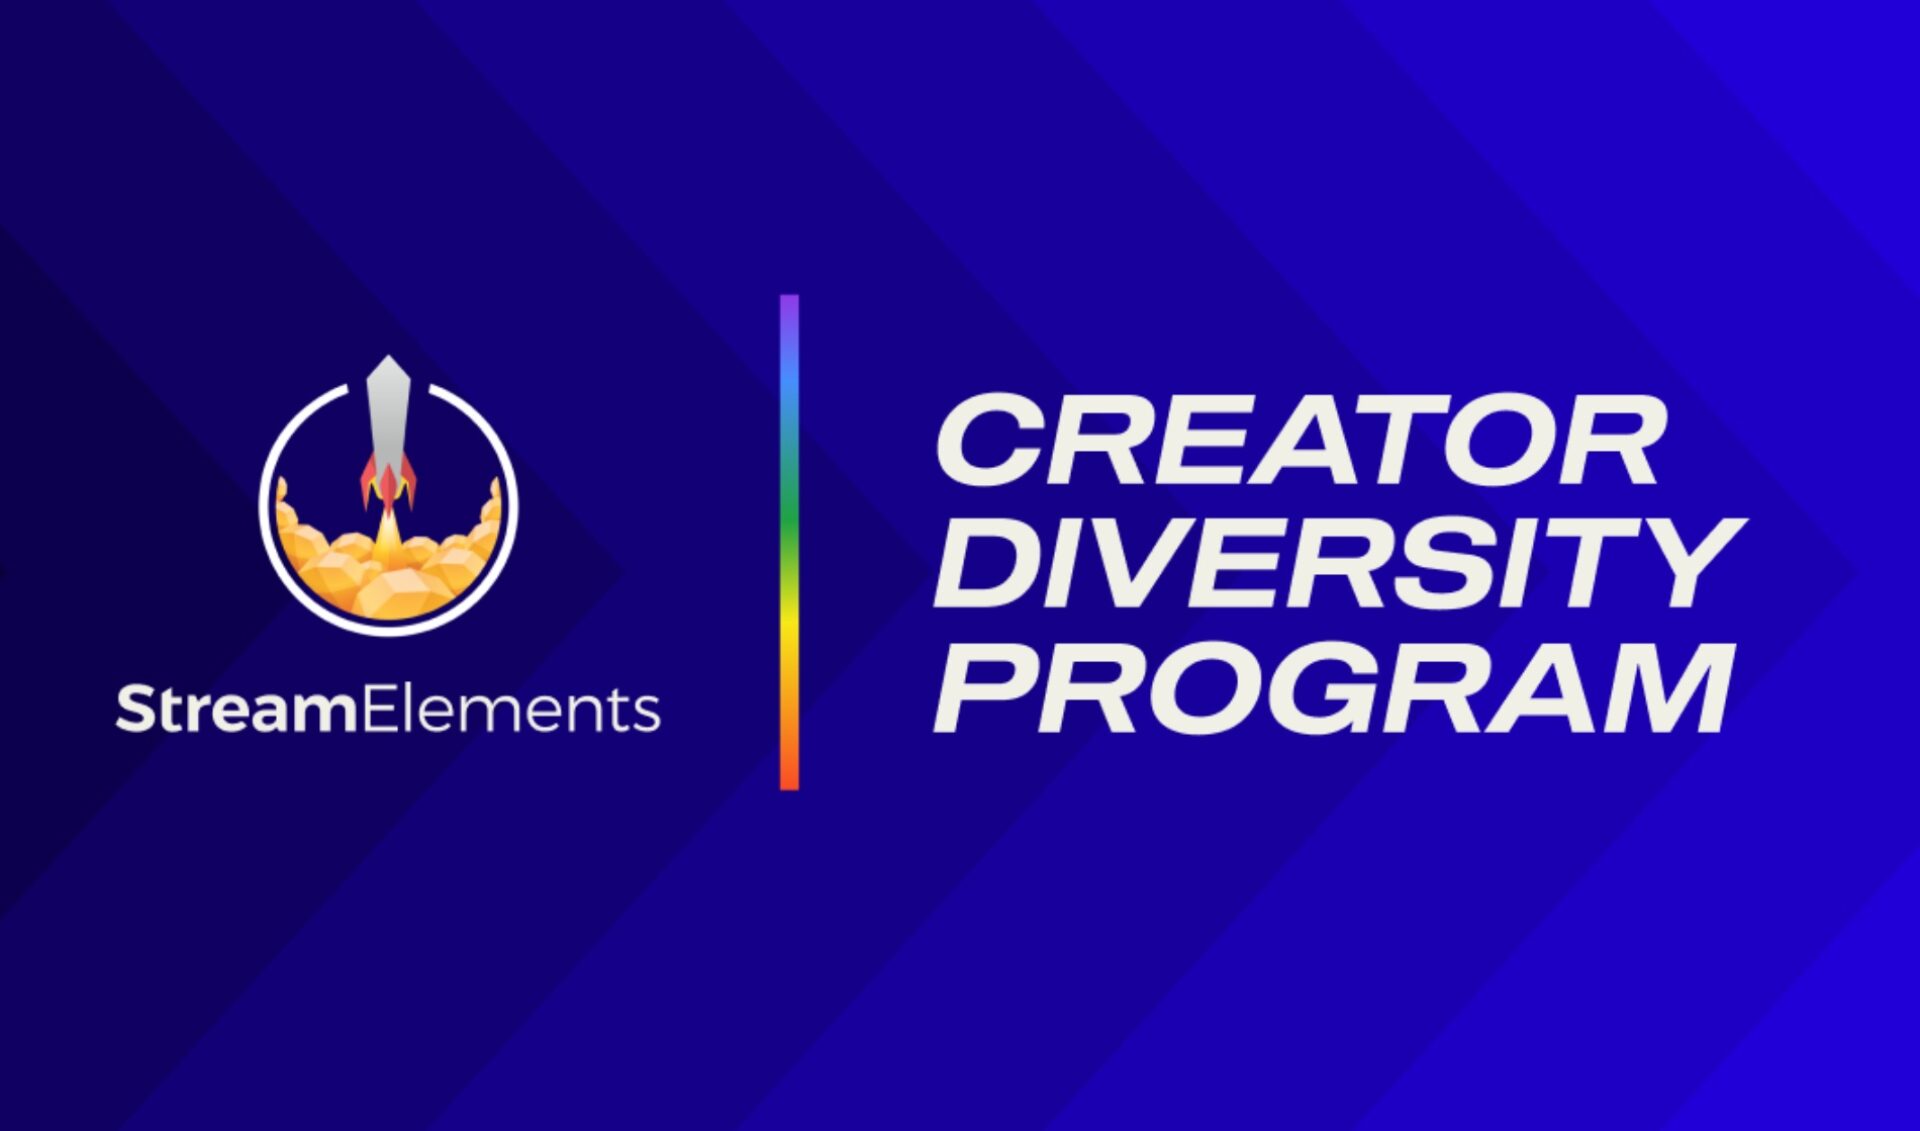 StreamElements brings back Creator Diversity Program to deliver $3,000 to creators from underrepresented groups